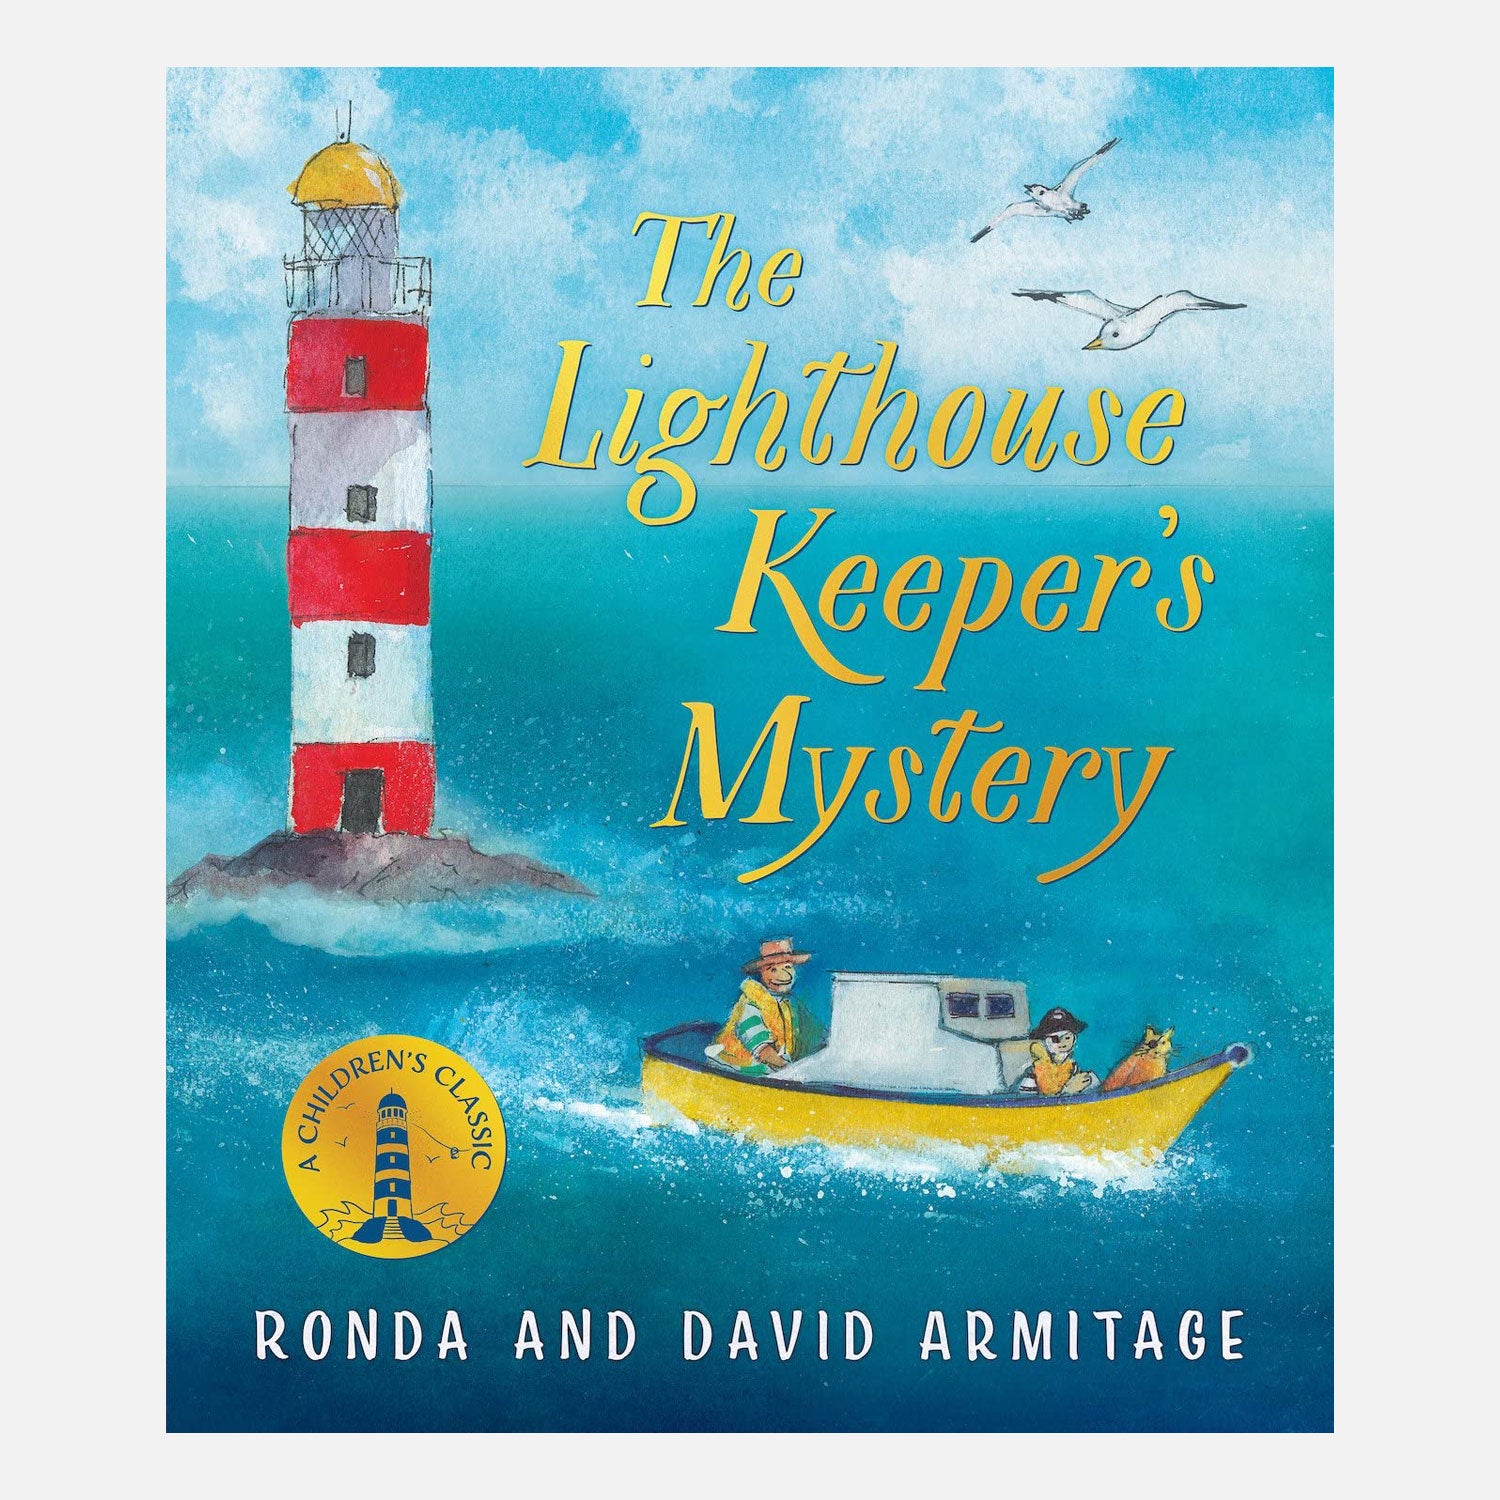 The Lighthouse keeper's mystery. A children's classic. Cover shows a yellow boat heading away from a lighthouse on a rock in the sea